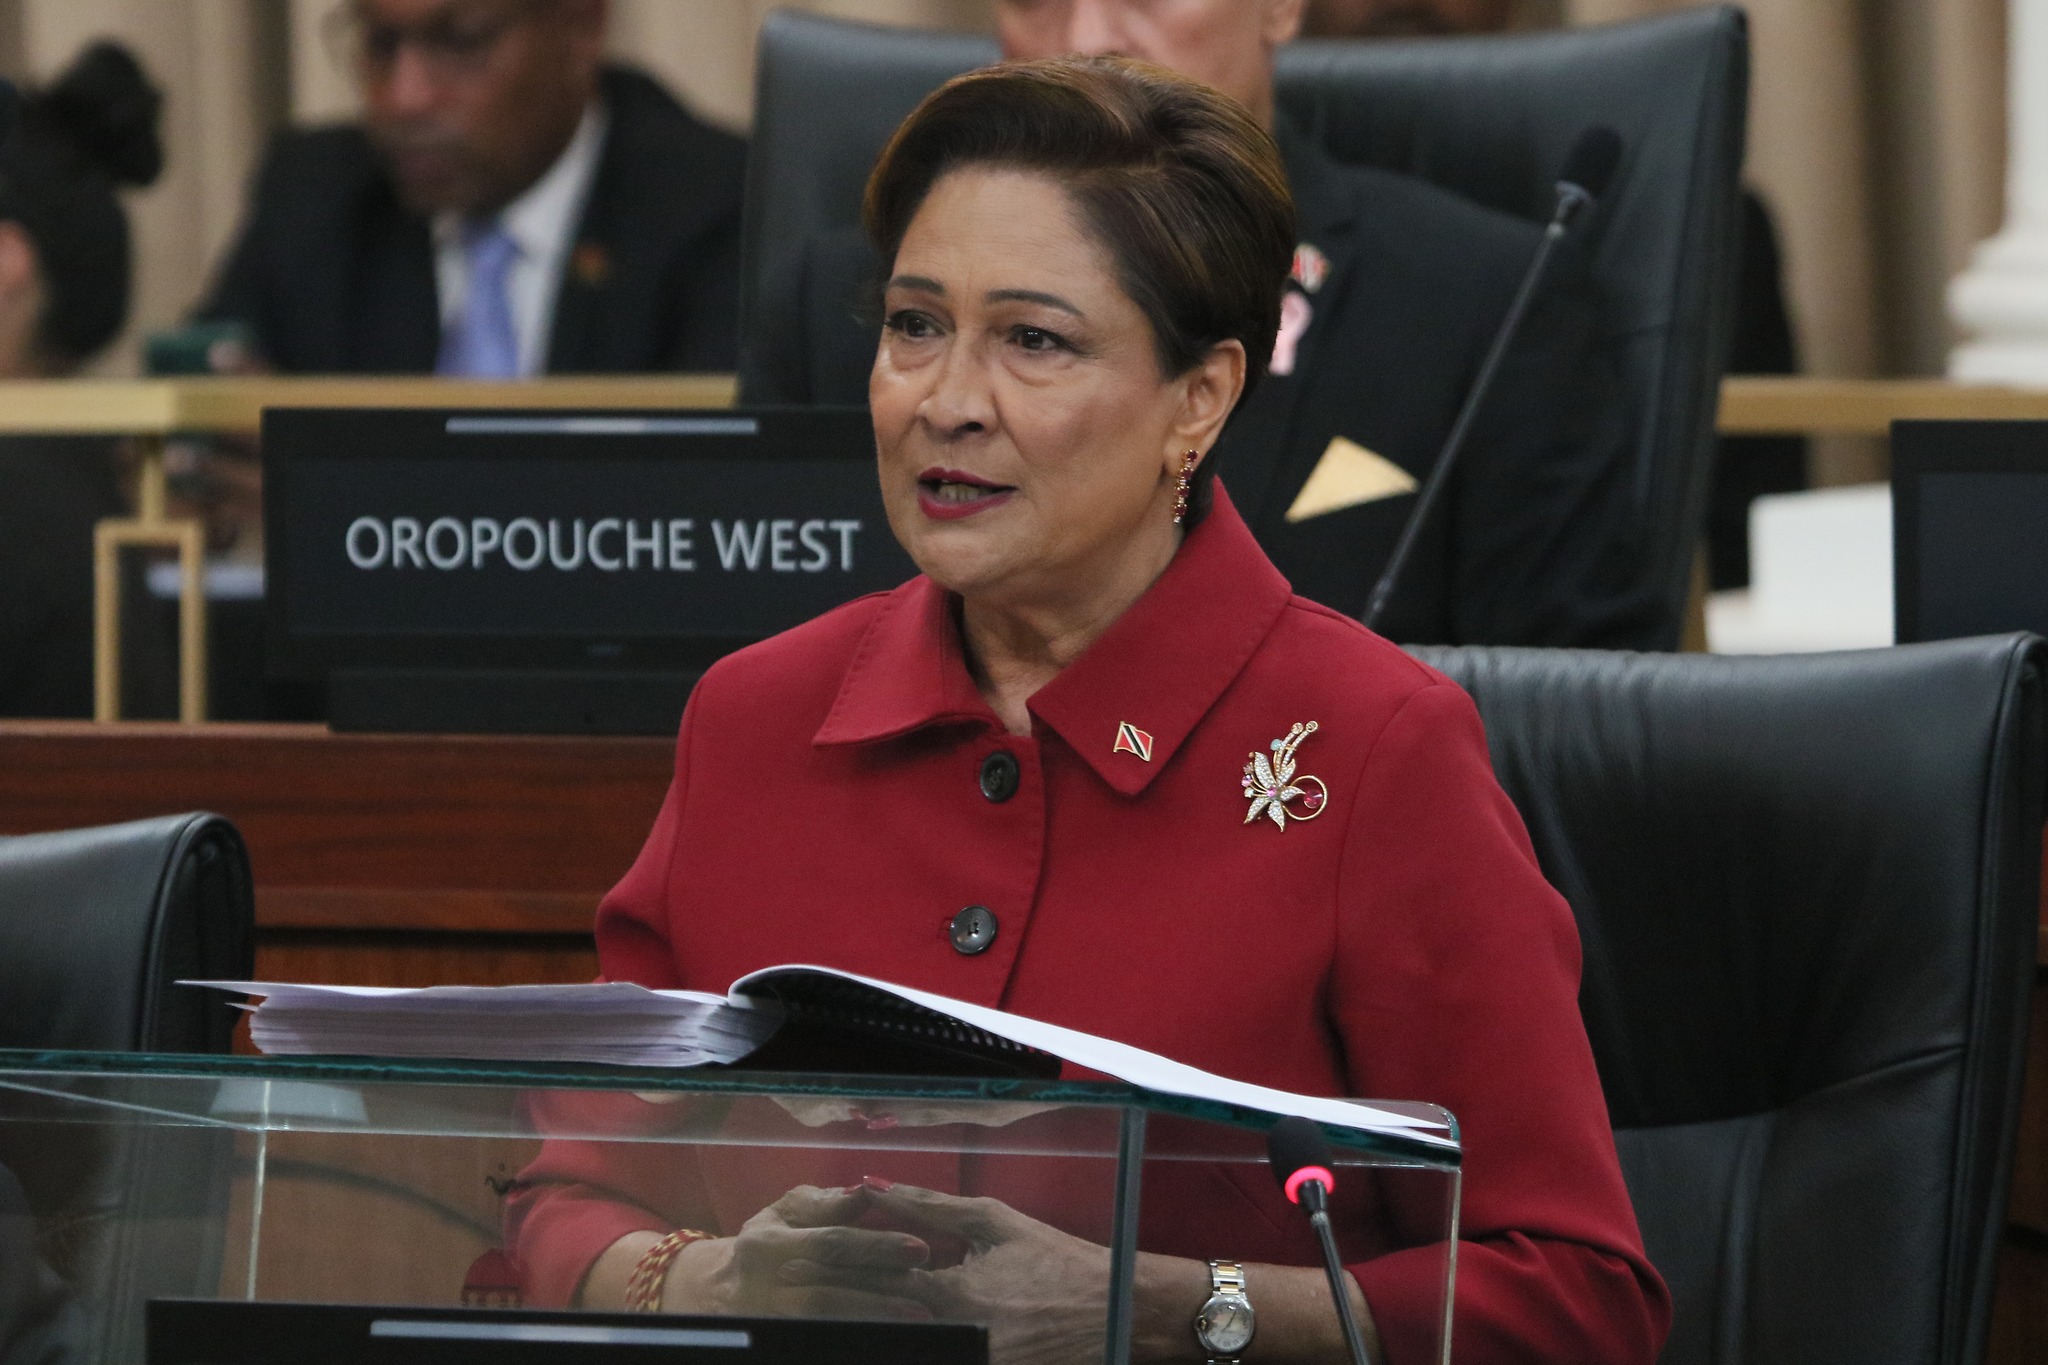 Kamla wants investigation into “unacceptable” ruling by Master of the Court